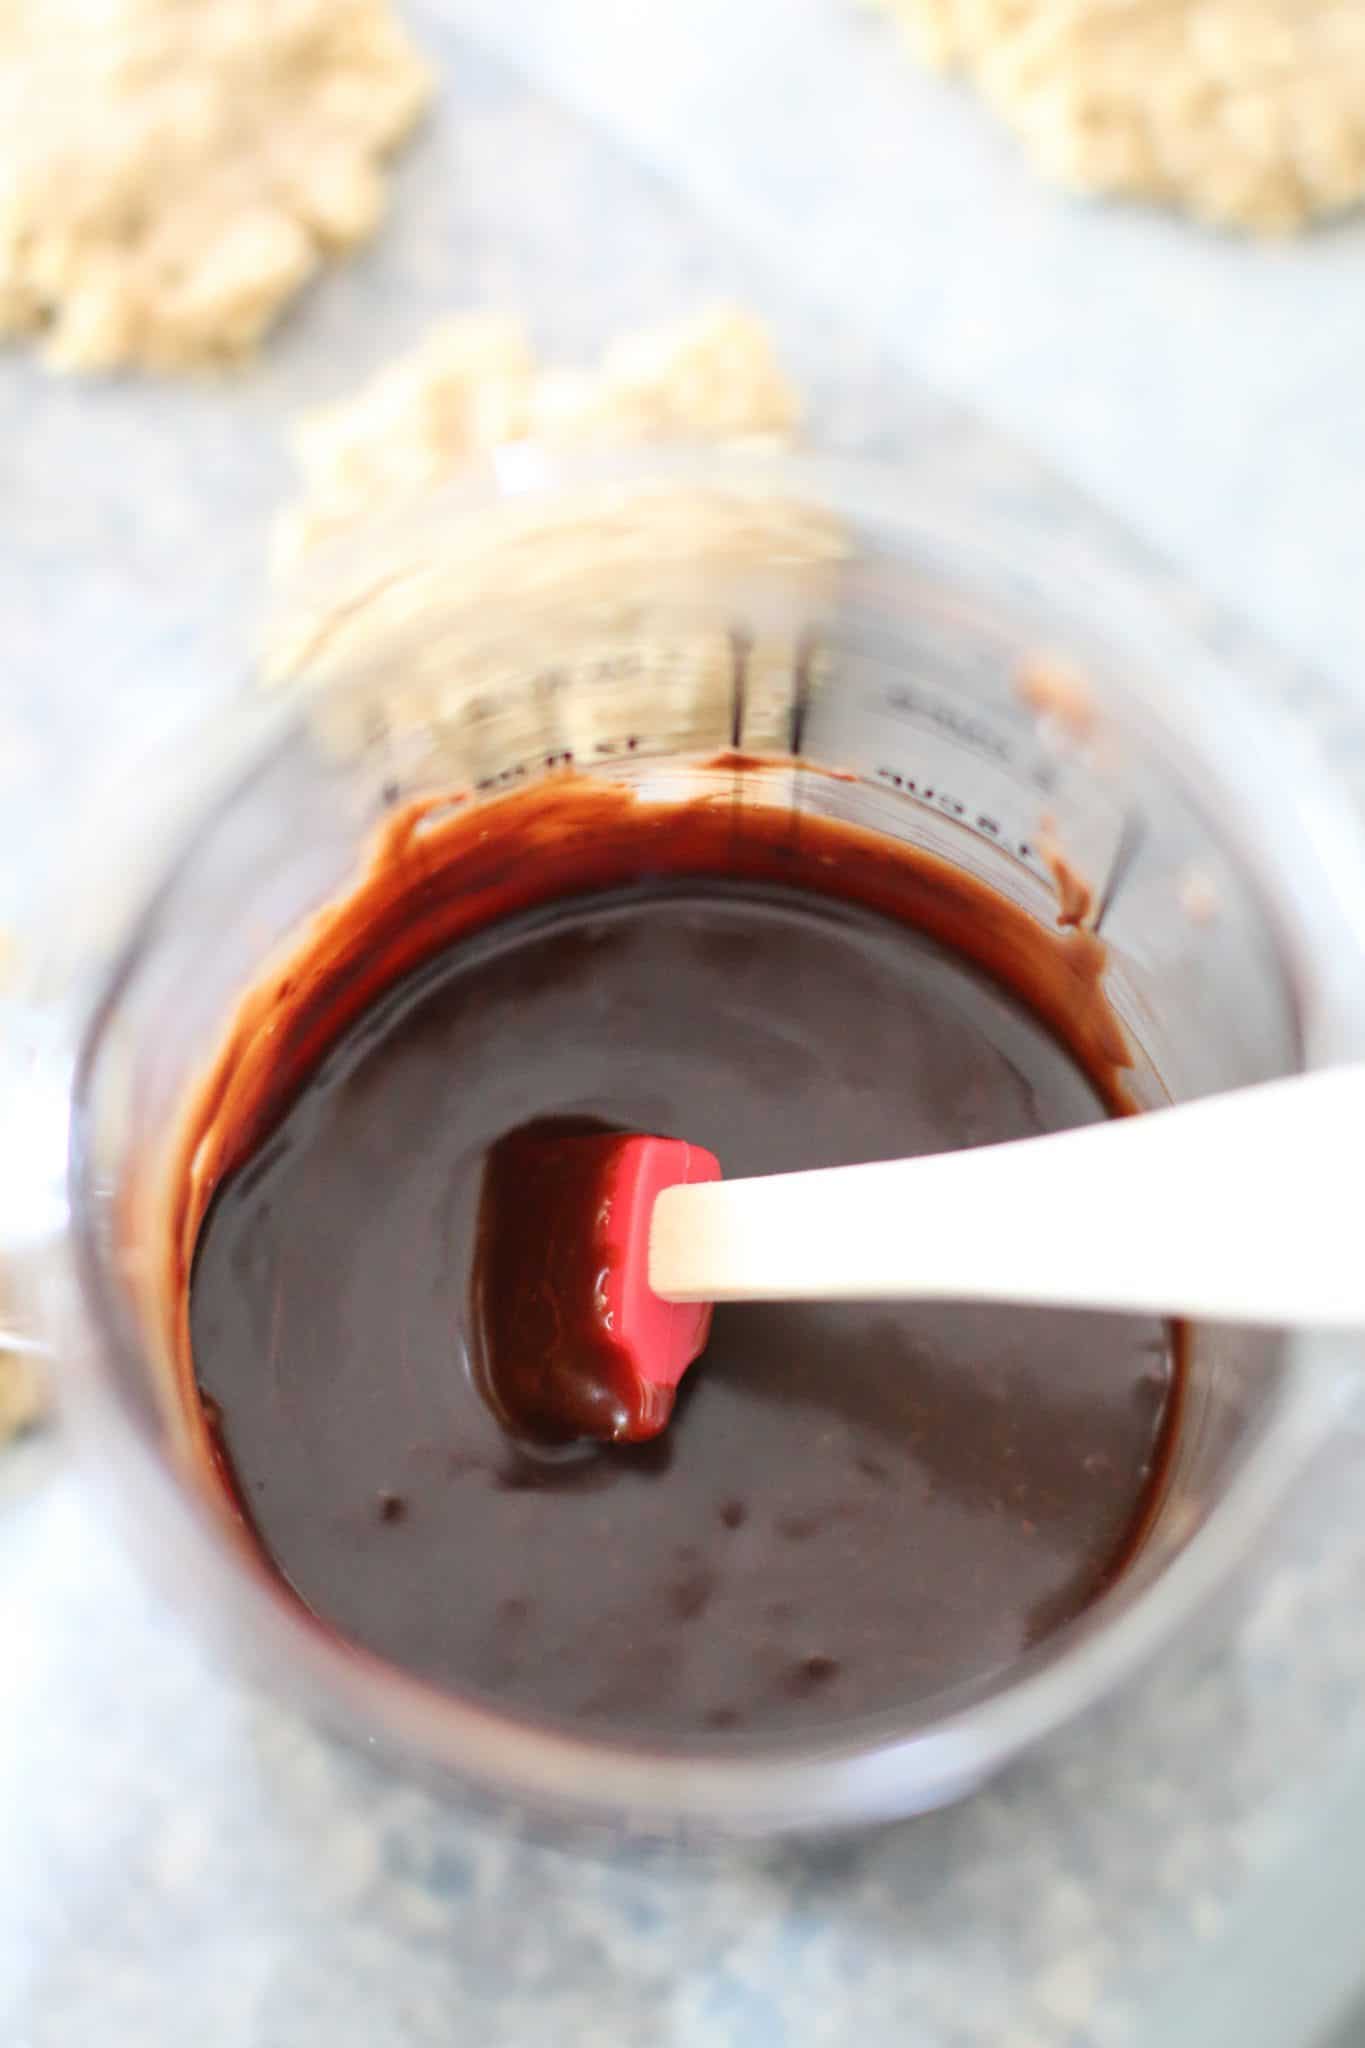 melted chocolate shown in a measuring cup.